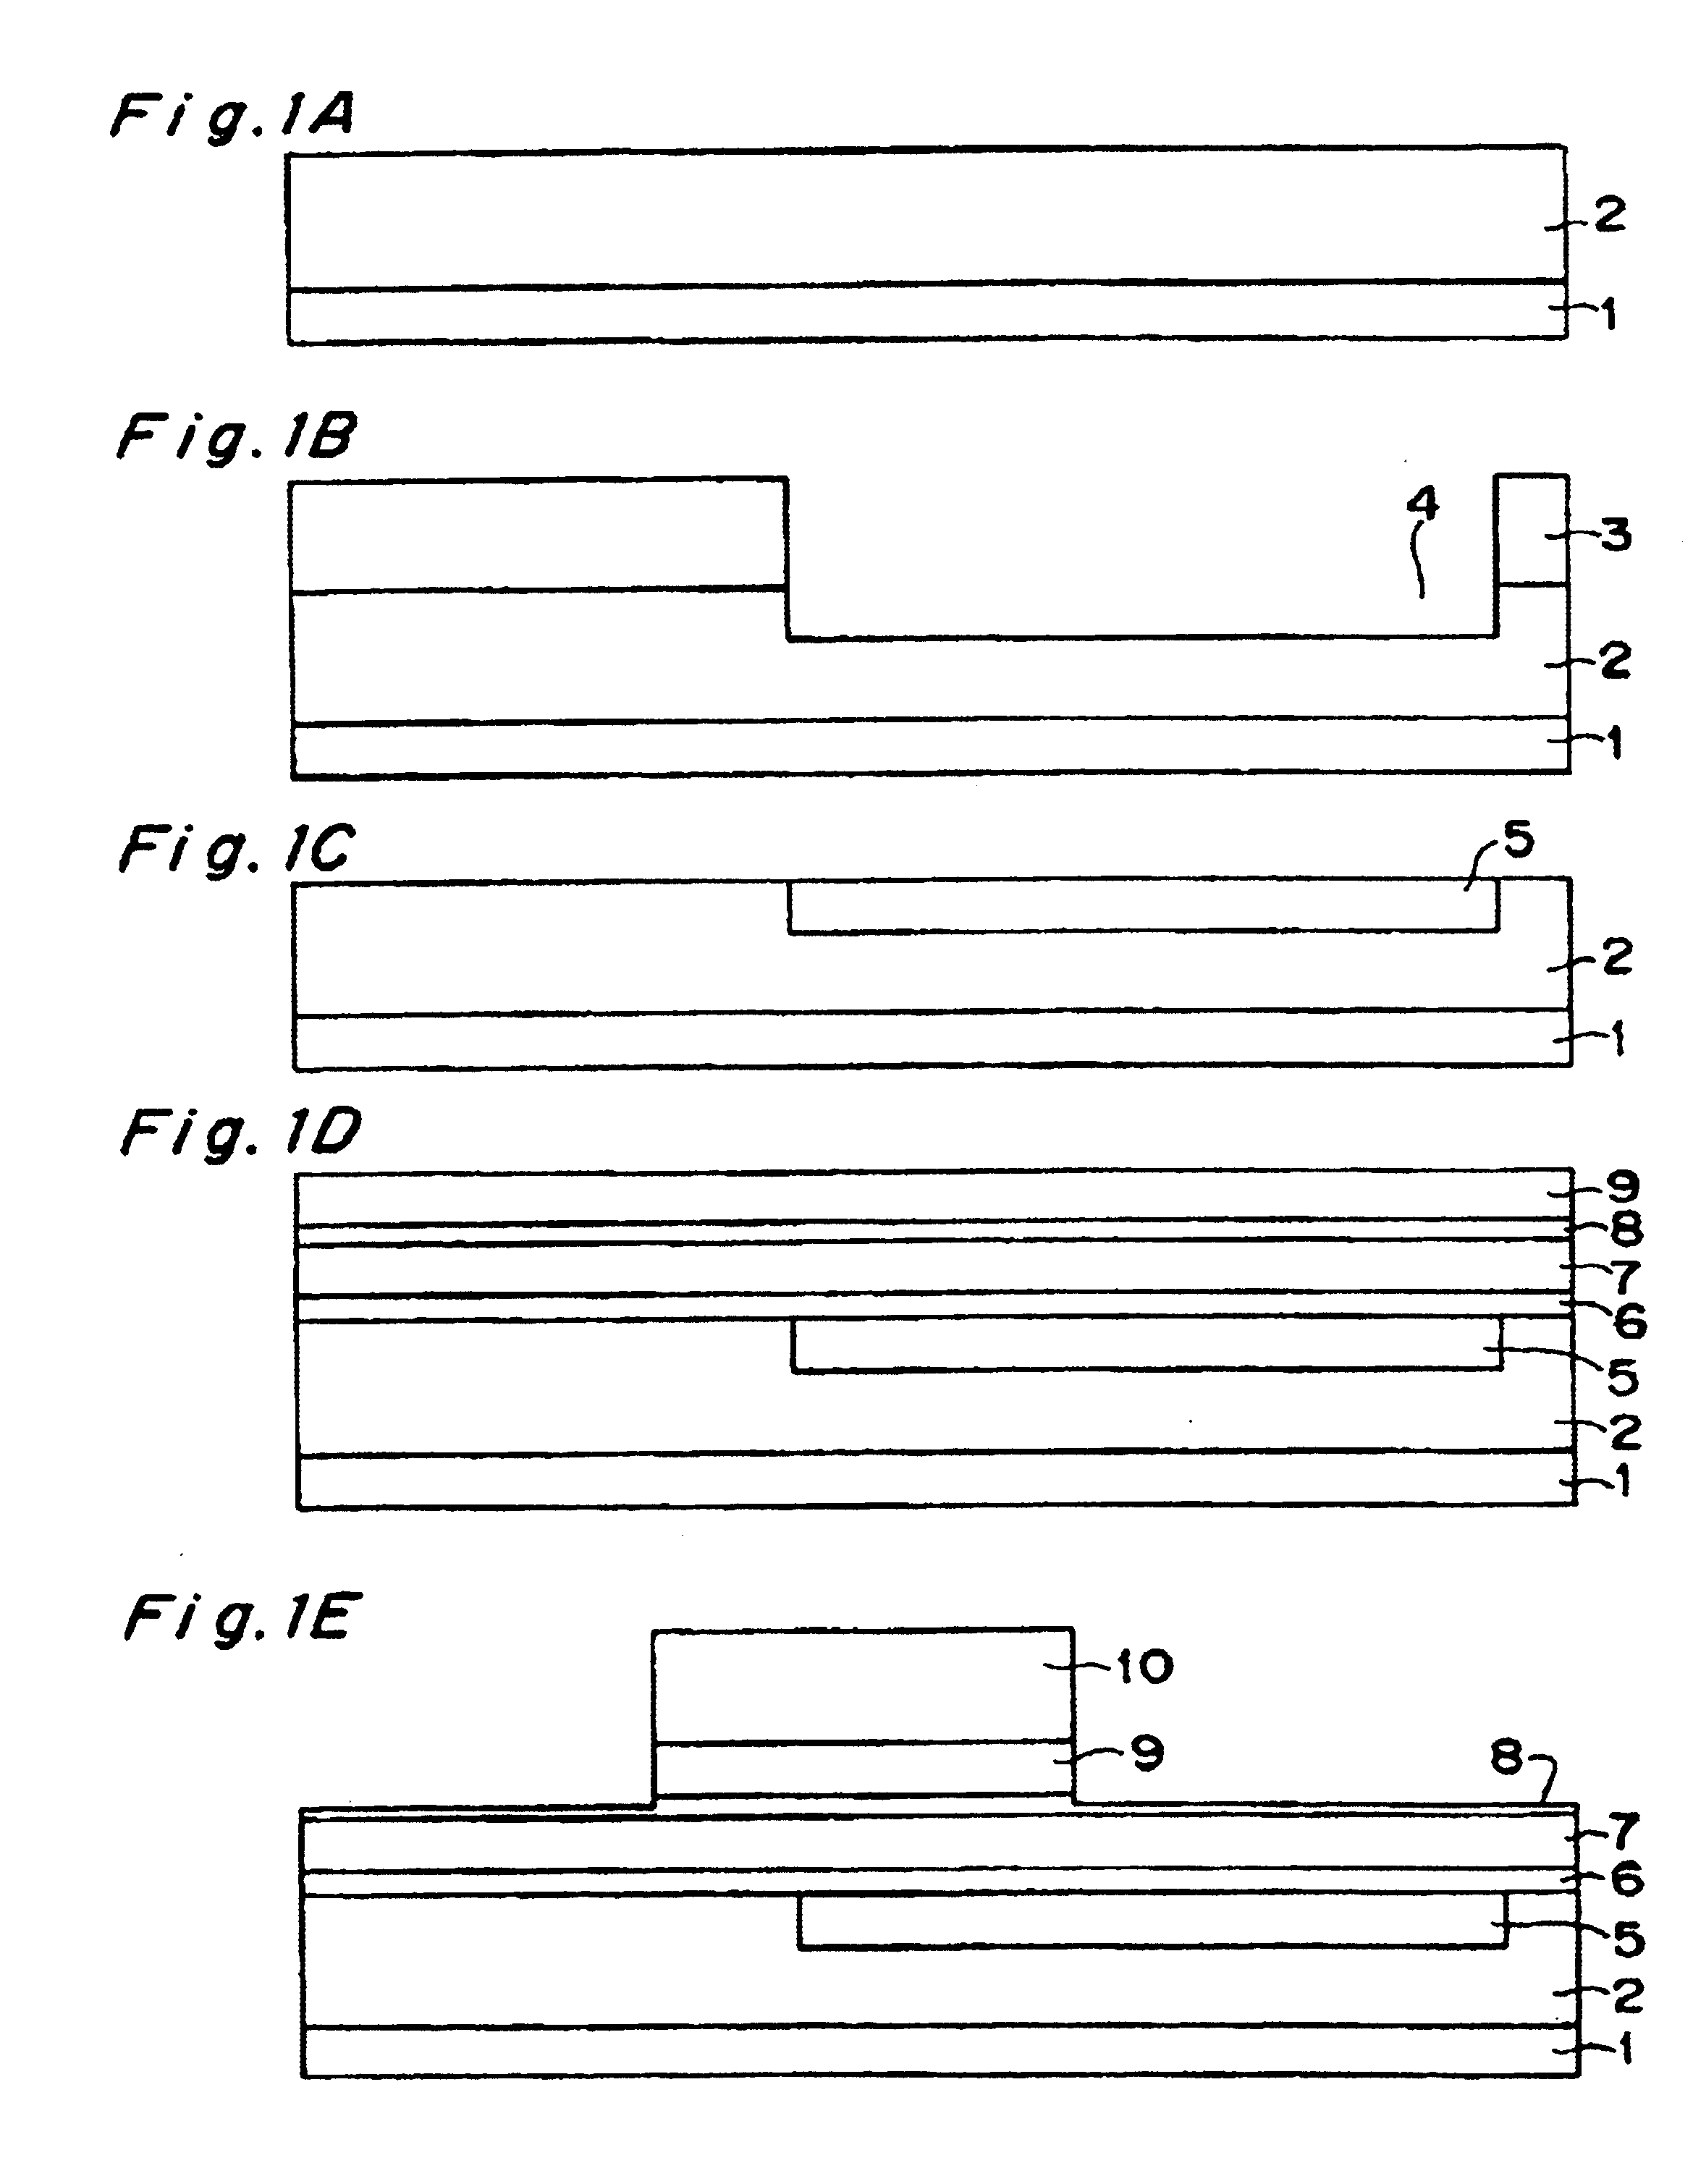 Semiconductor capacitor device having reduced voltage dependence